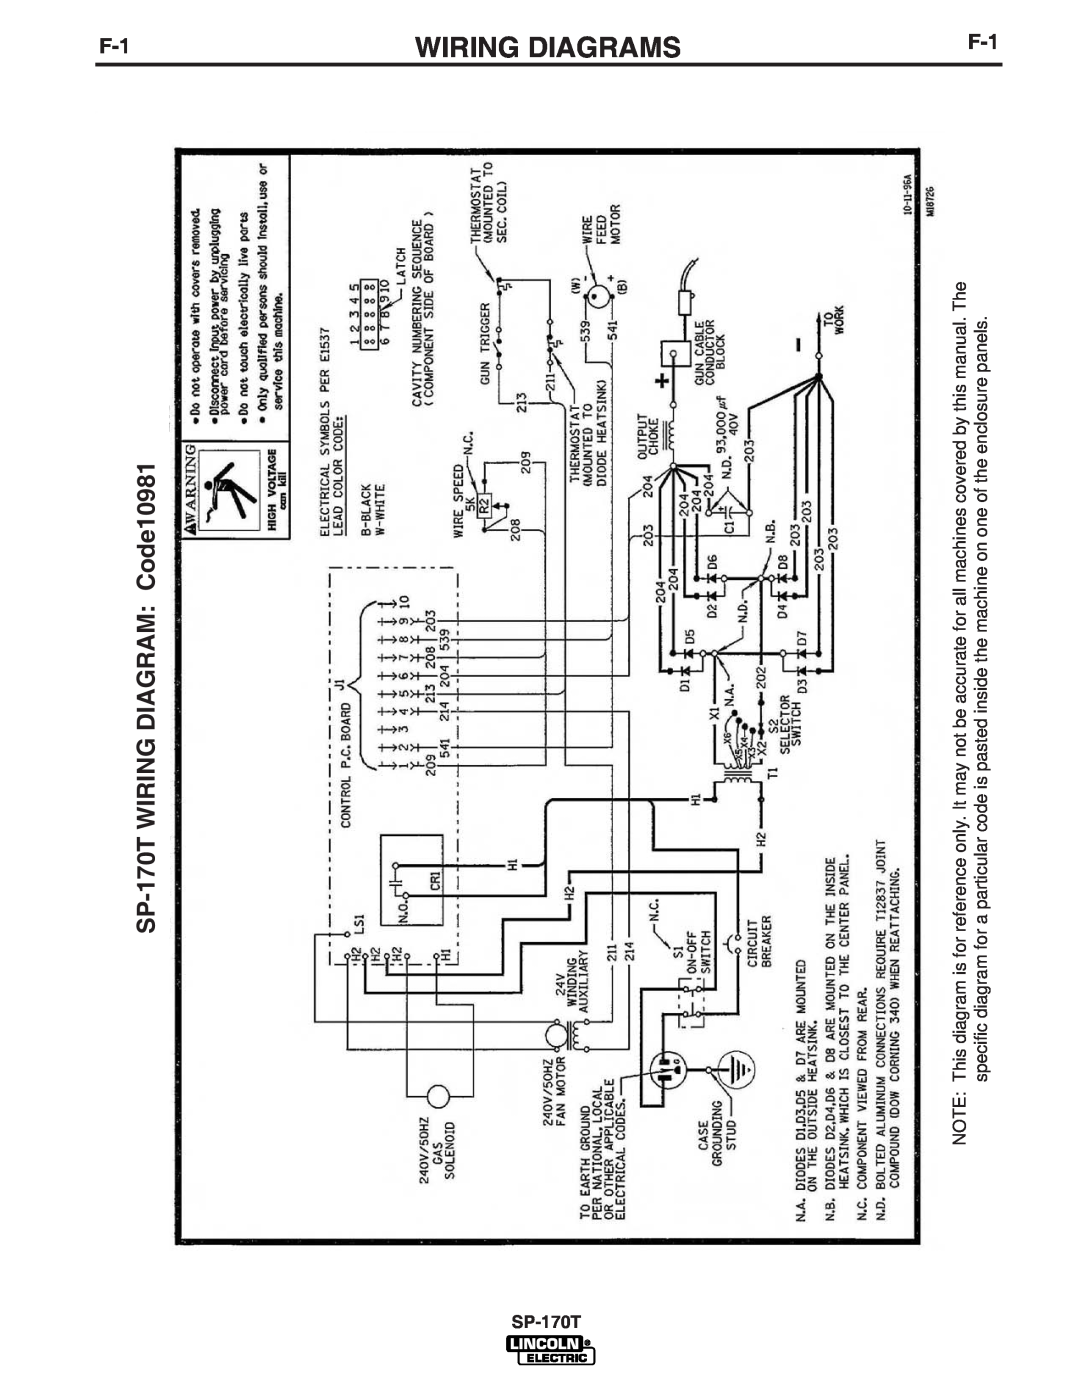 Lincoln Electric IM794 manual Wiring Diagrams, SP-170T WIRING DIAGRAM Code10981 